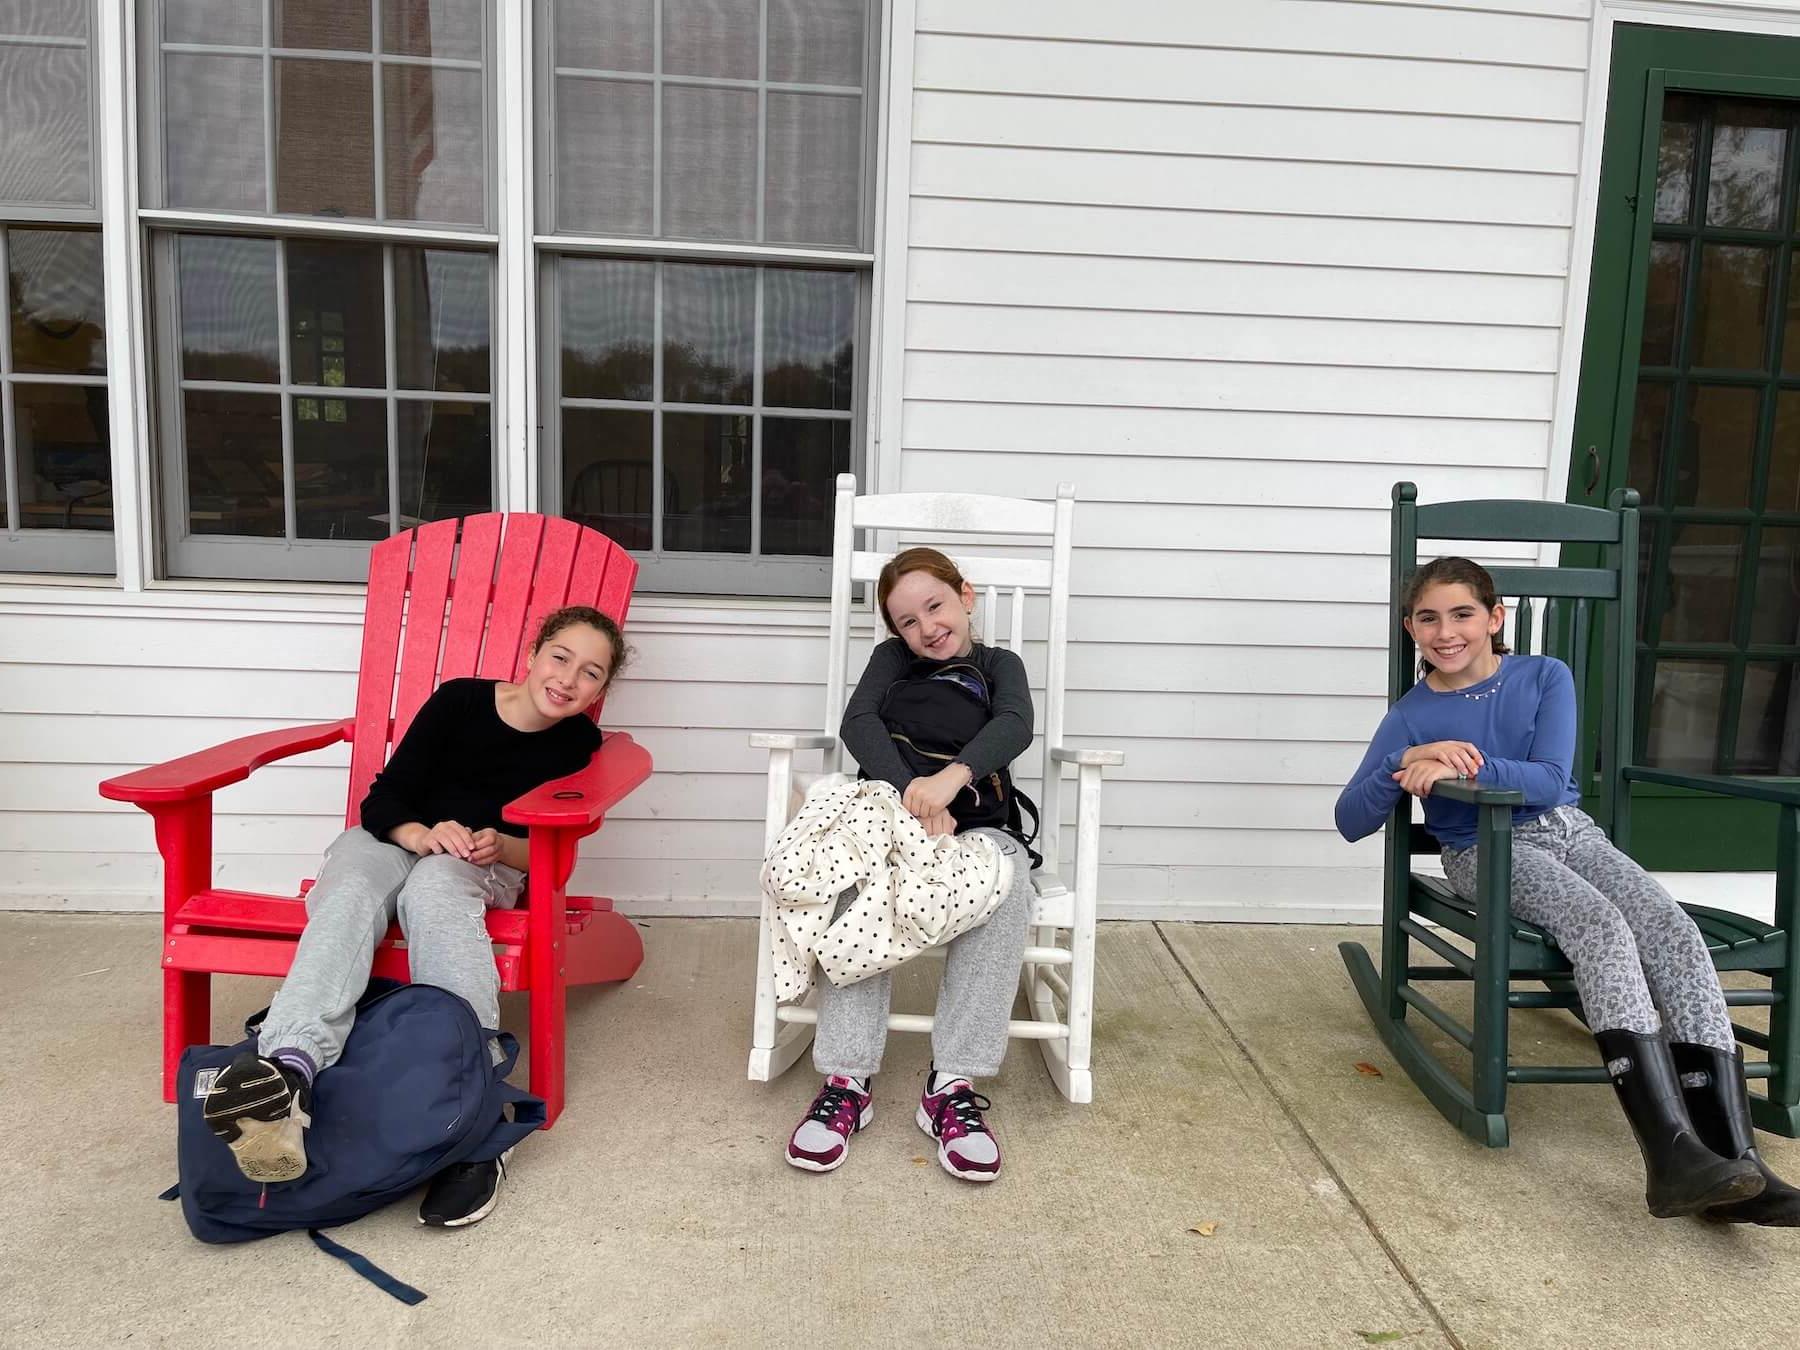 Three Ethical Culture students gather on porch, smiling from rocking chairs.